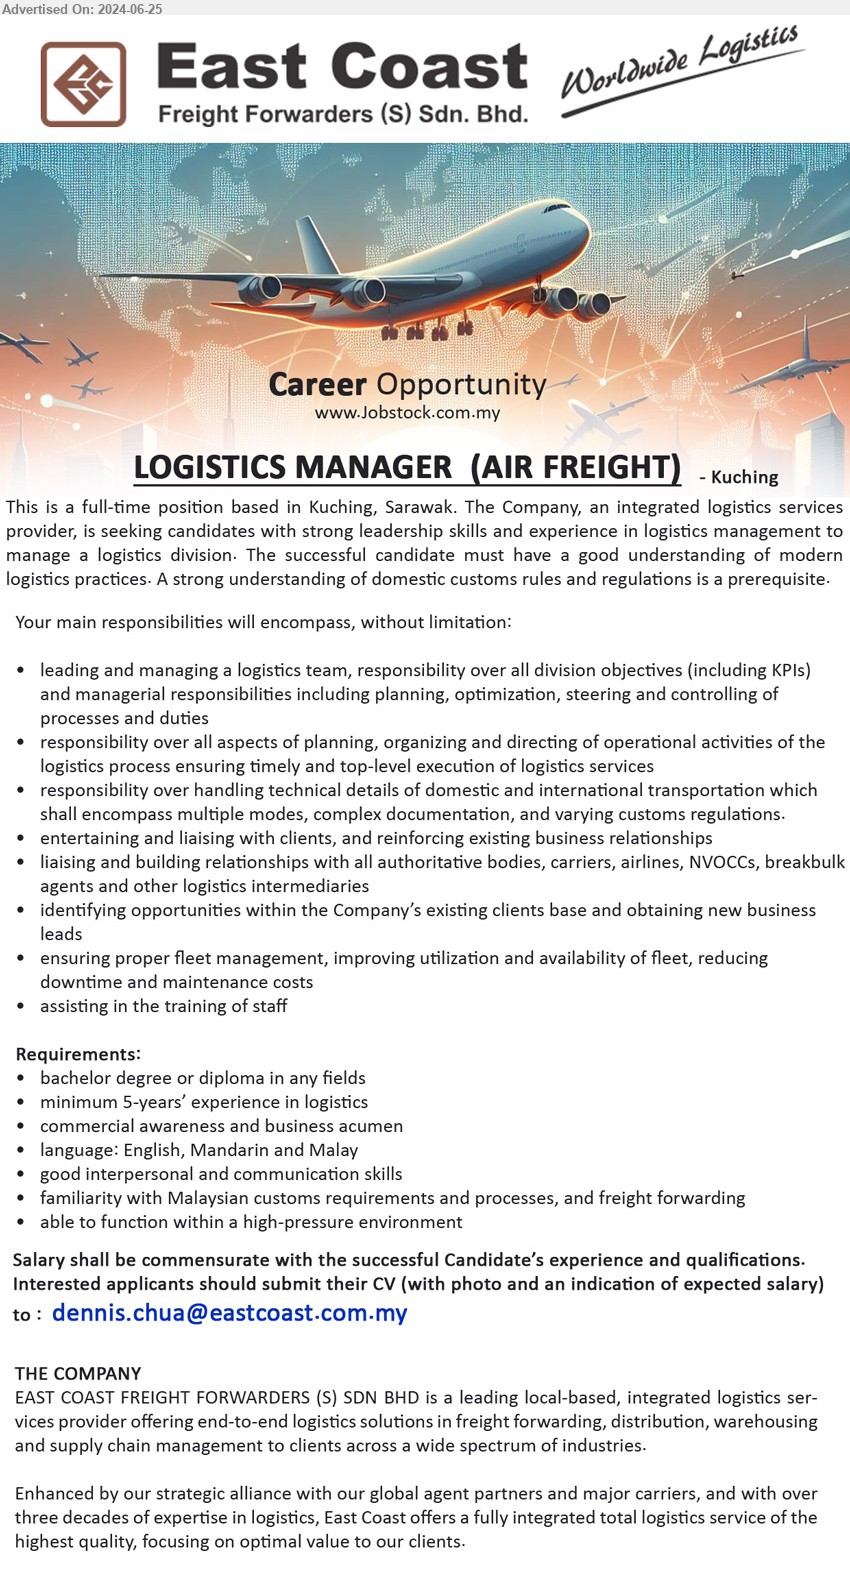 EAST COAST FREIGHT FORWARDERS (S) SDN BHD - LOGISTICS MANAGER  (AIR FREIGHT) (Kuching), Bachelor Degree or Diploma, minimum 5-years’ experience in logistics, familiarity with Malaysian customs requirements and processes, and freight forwarding,...
Email resume to ...
